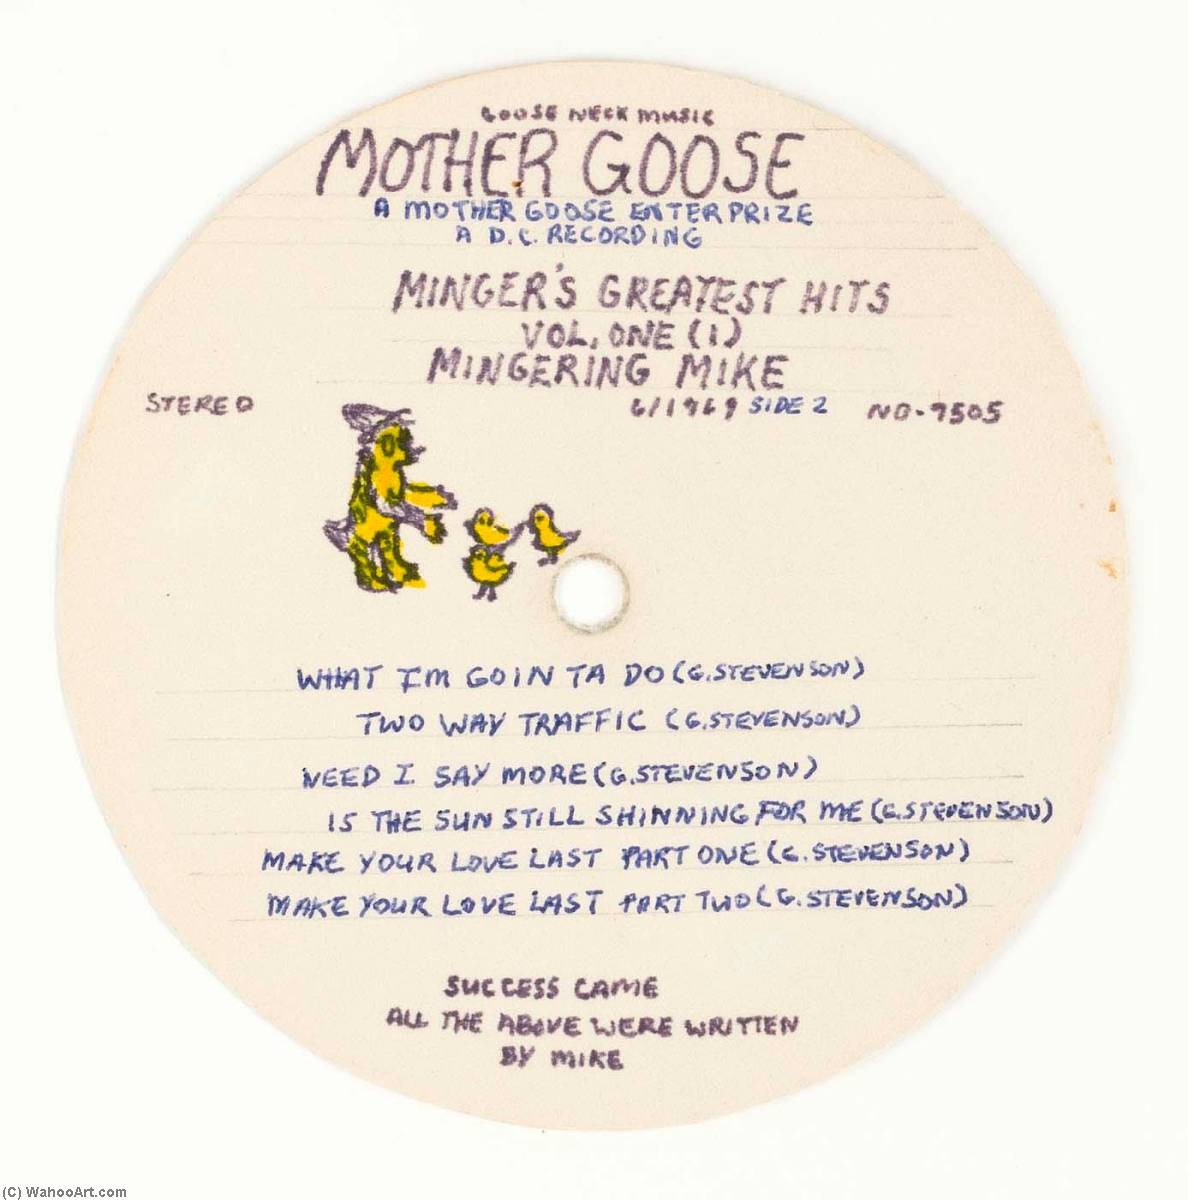 Wikioo.org - สารานุกรมวิจิตรศิลป์ - จิตรกรรม Mingering Mike - MOTHER GOOSE MINGER'S GREATEST HITS VOL. ONE, MINGERING MIKE